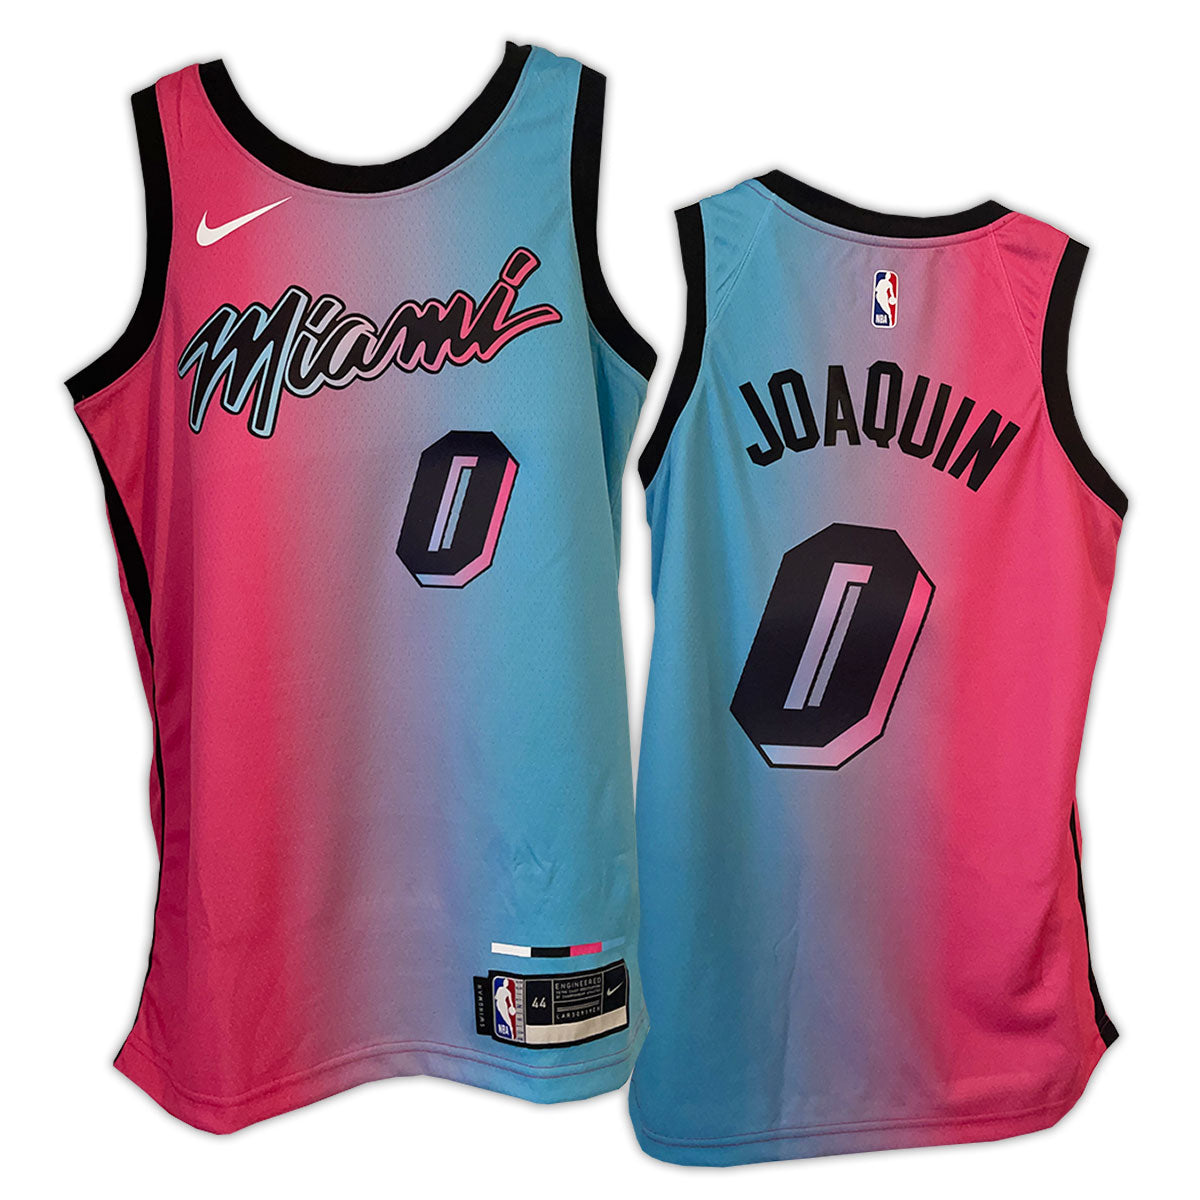 ONE OF A KIND NBA OFFICIAL JOAQUIN #0 NIKE MIAMI HEAT VICE NIGHTS